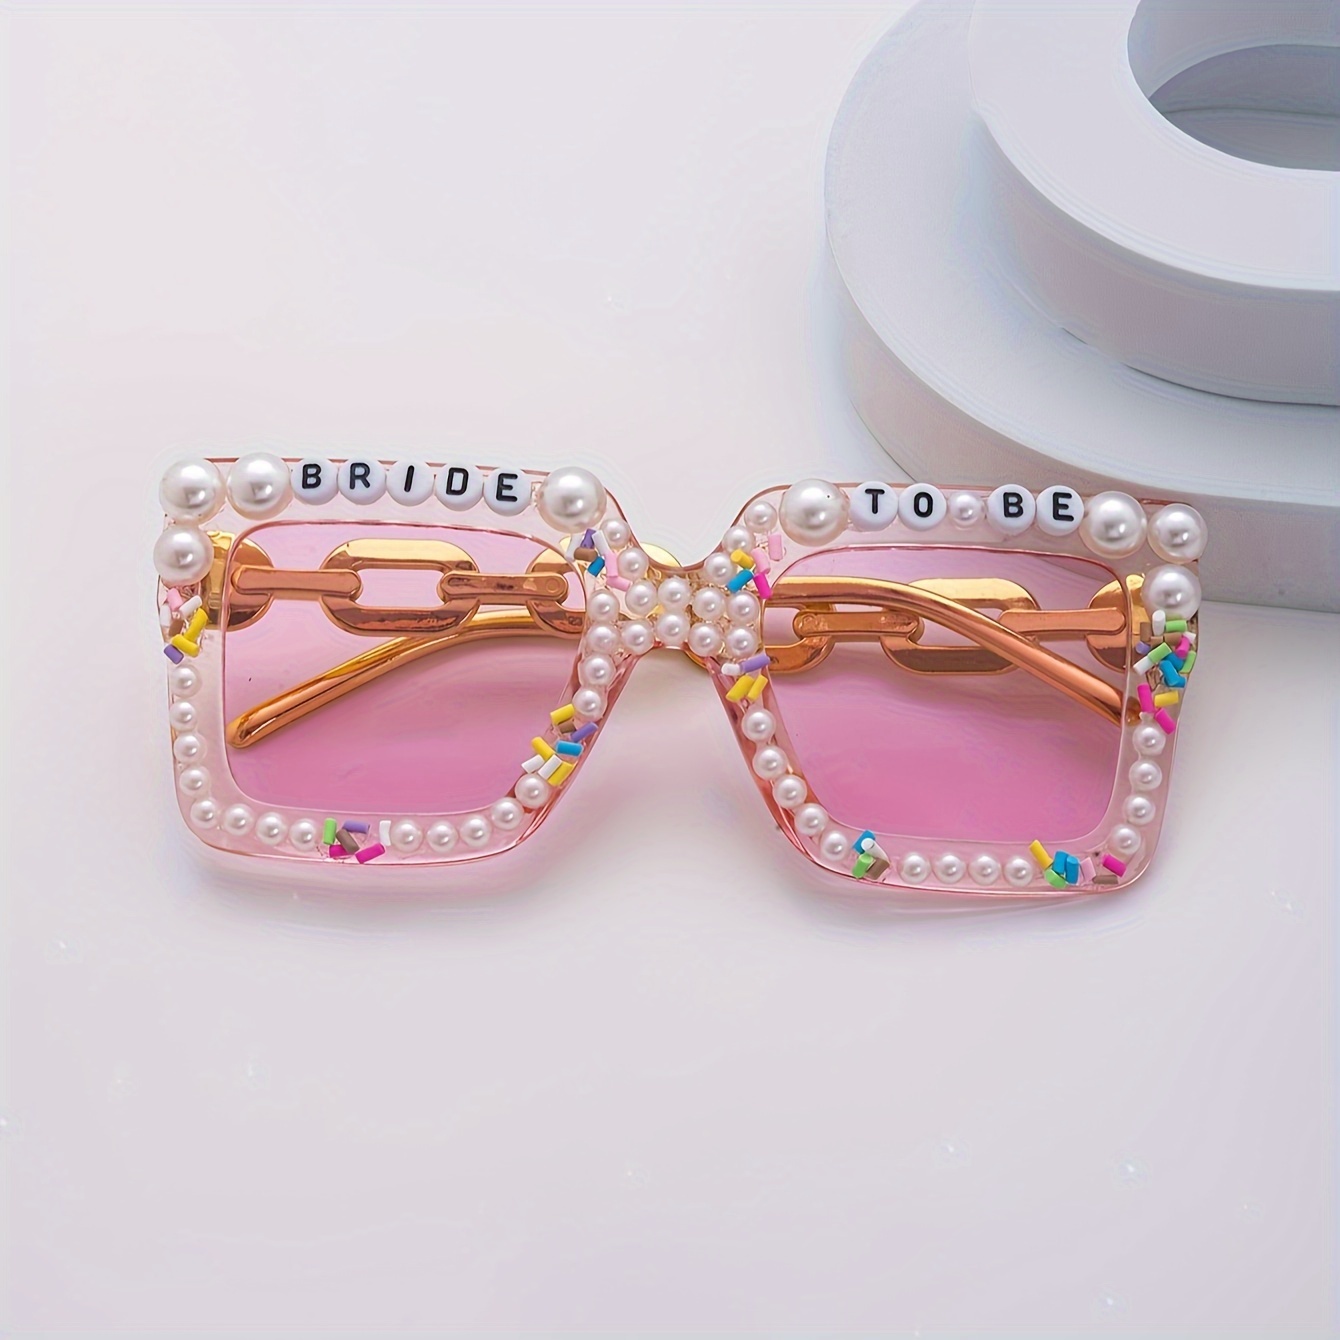 

Oversized Square "bride To Be" Glasses With Faux Pearl And Faux Candy Accents, Pink Lens Fashion Party Eyewear For Bachelorette Celebrations